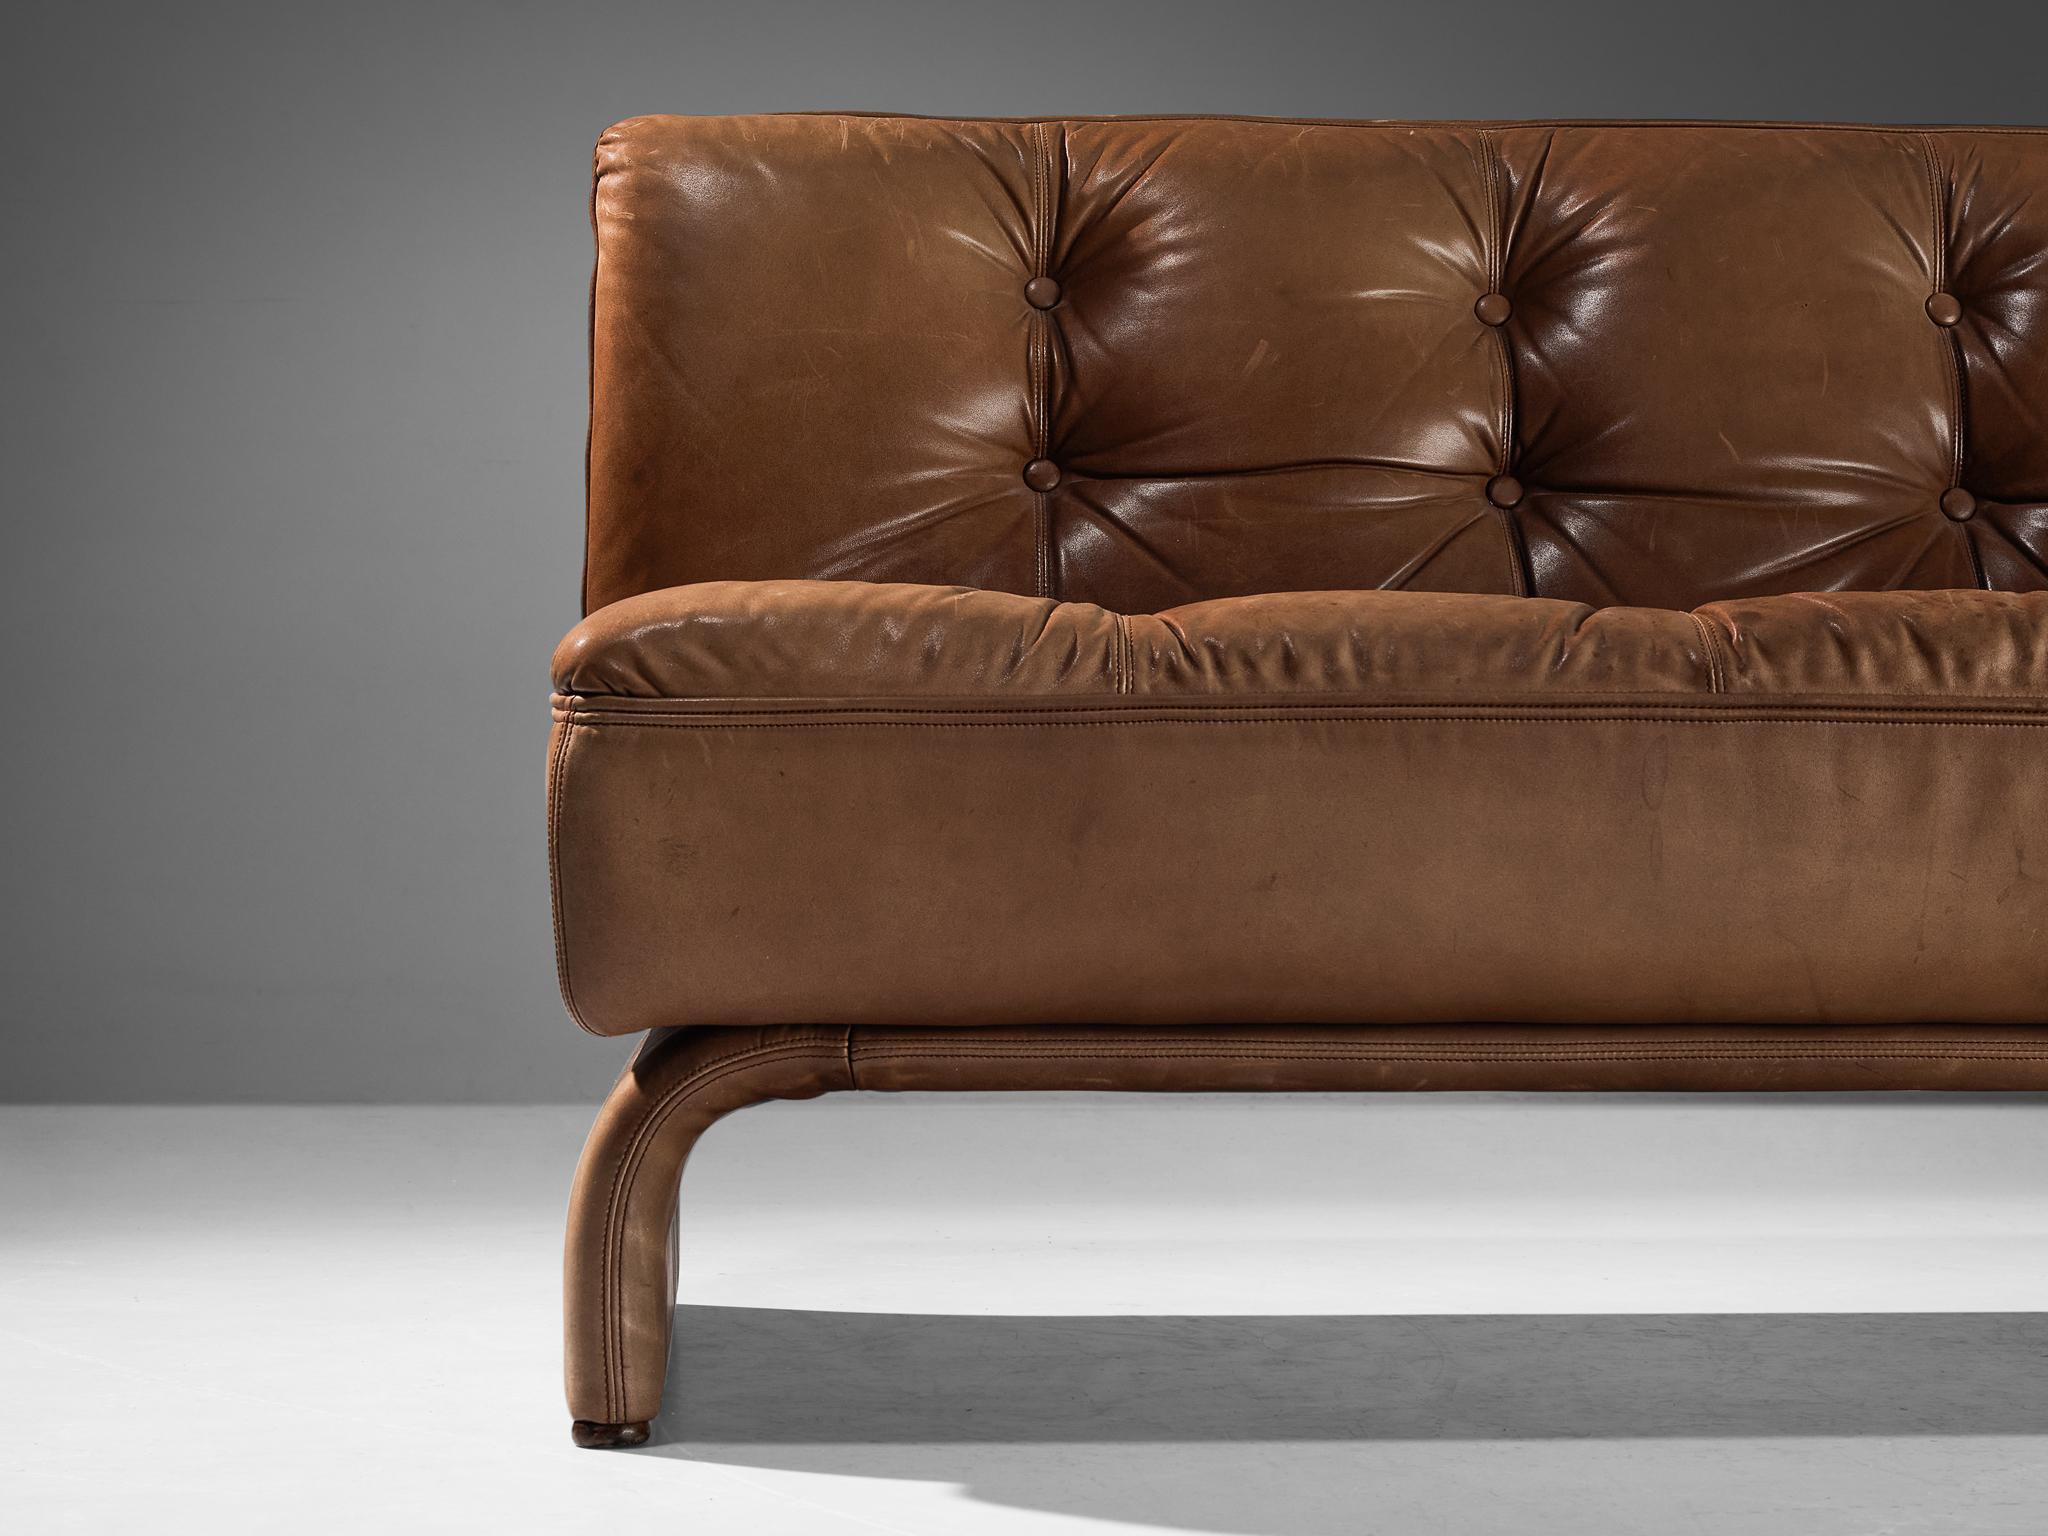 Austrian Johannes Spalt for Wittmann 'Constanze' Sofa or Daybed in Cognac Leather  For Sale